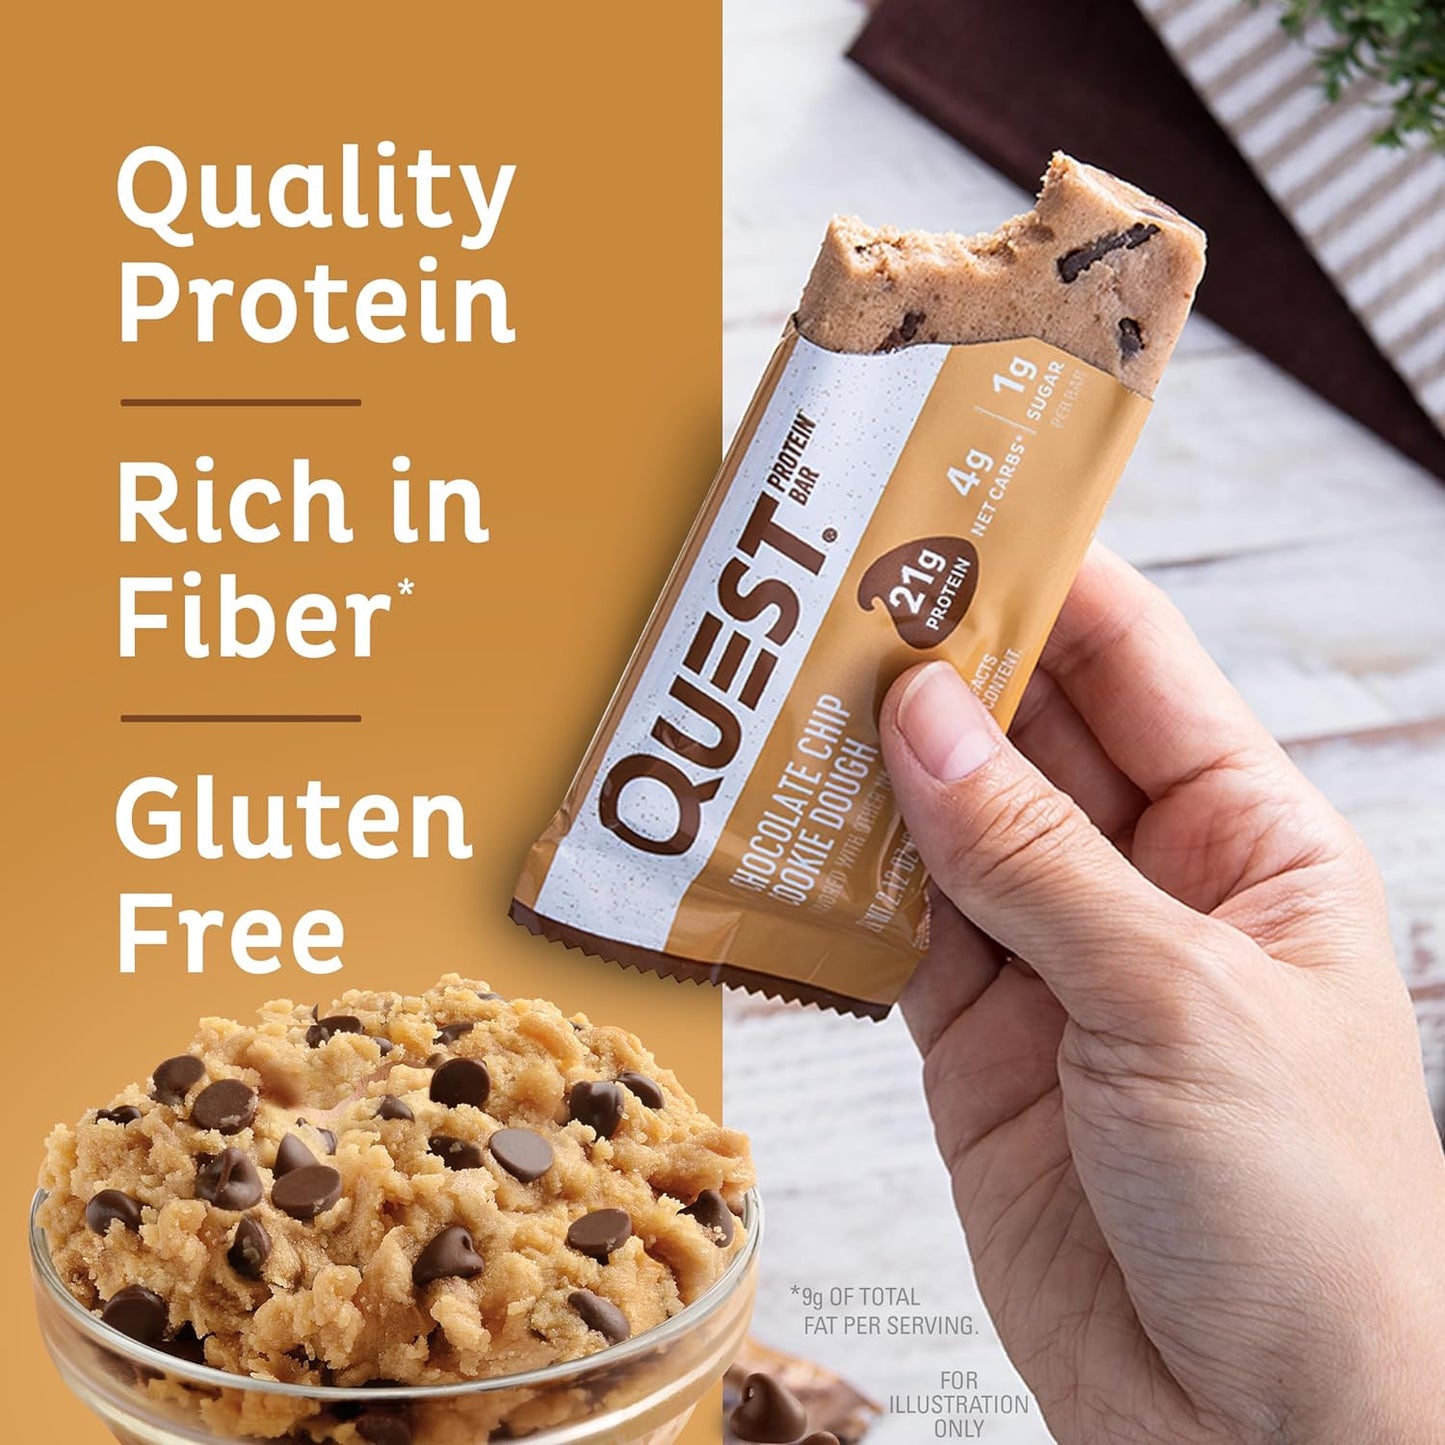 Quest Nutrition Chocolate Chip Cookie Dough Protein Bars, High Protein, Low Carb, Gluten Free, Keto Friendly, 12 Count